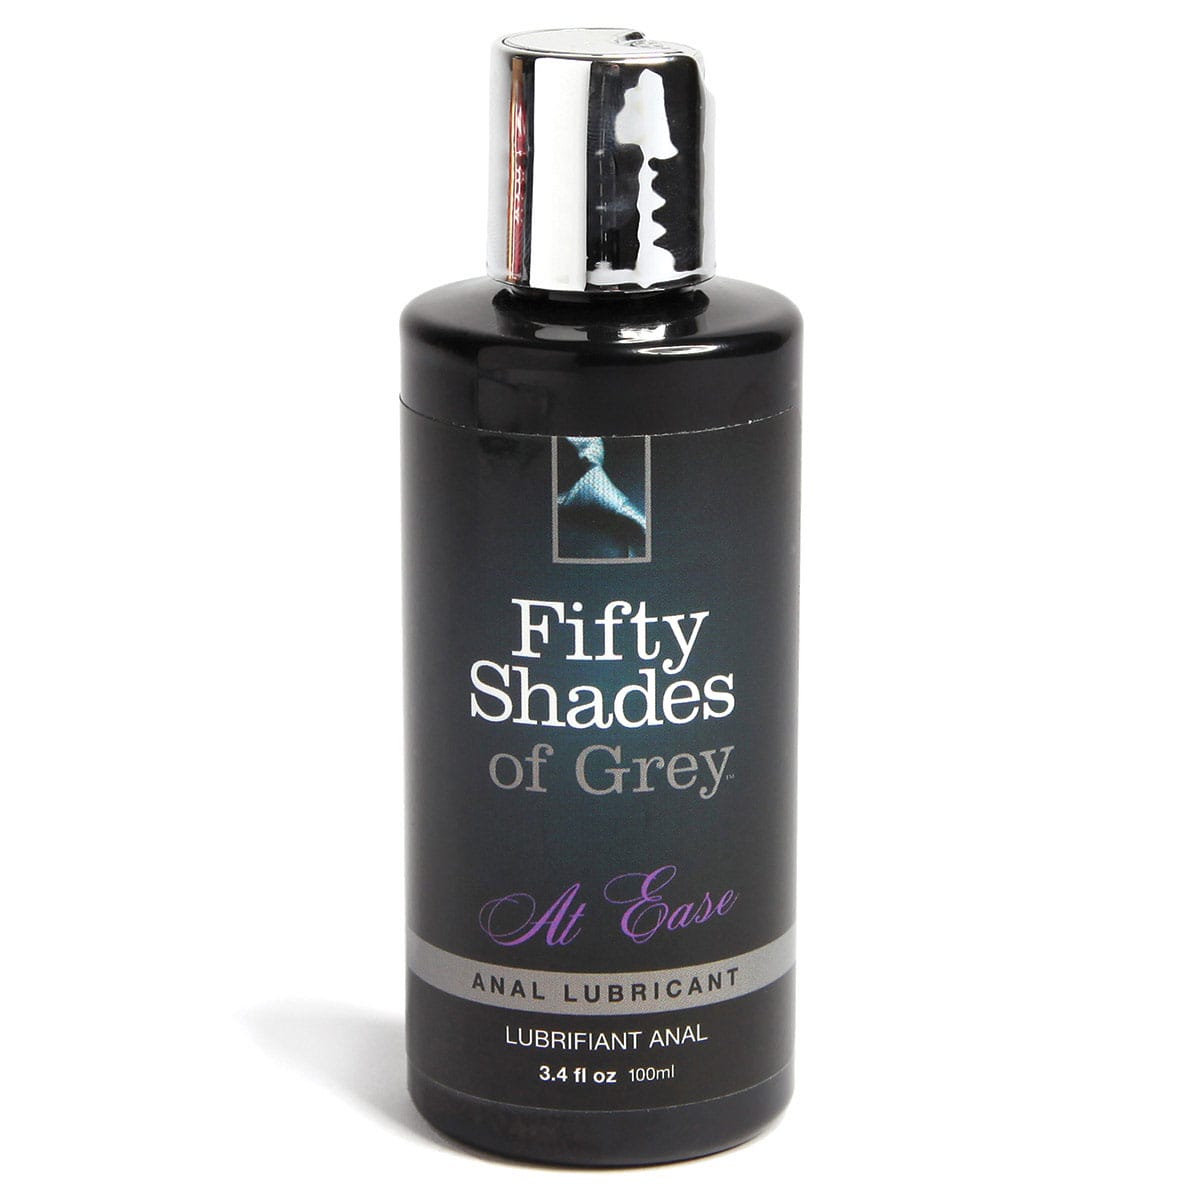 Buy   At Ease Anal        anal lube 3.4oz by Fifty Shades of Grey.